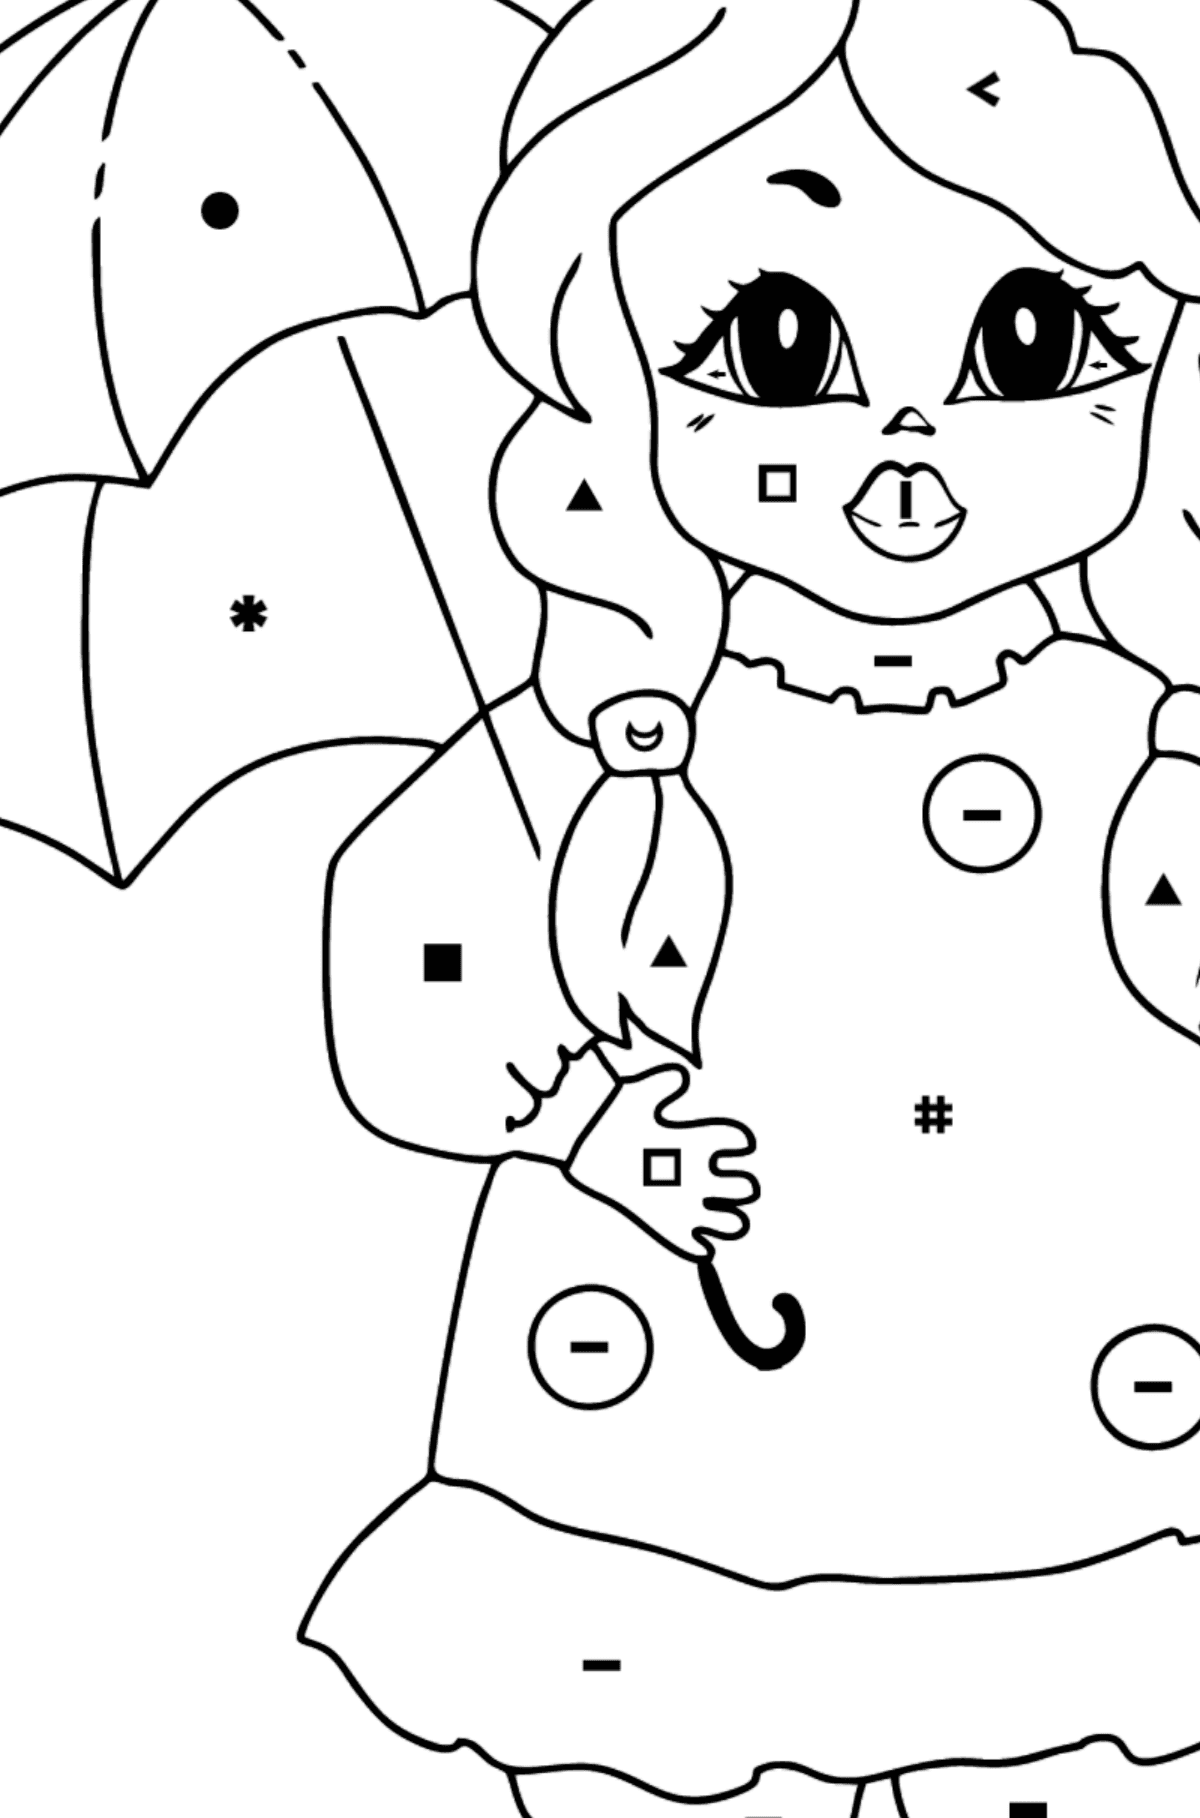 Funny princess coloring page - Coloring by Symbols for Kids